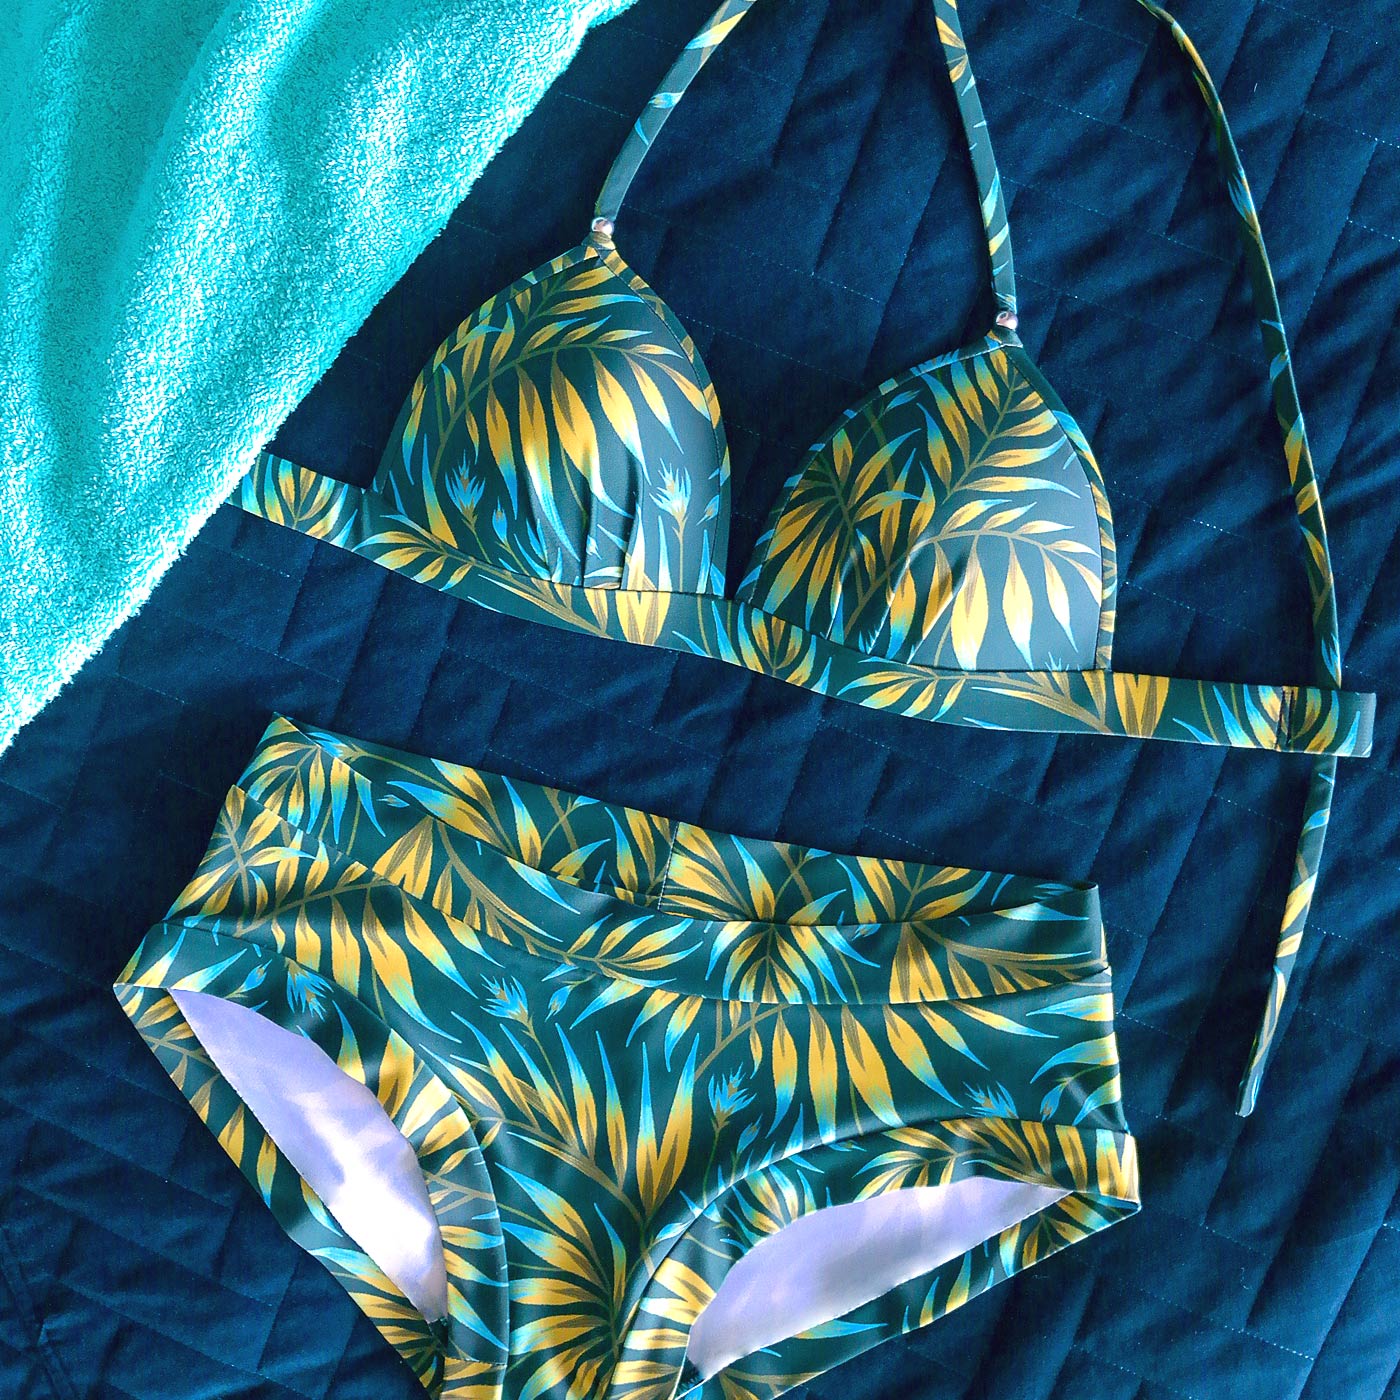 Tropical colorful palm leaf pattern bikini by Andrea Muller